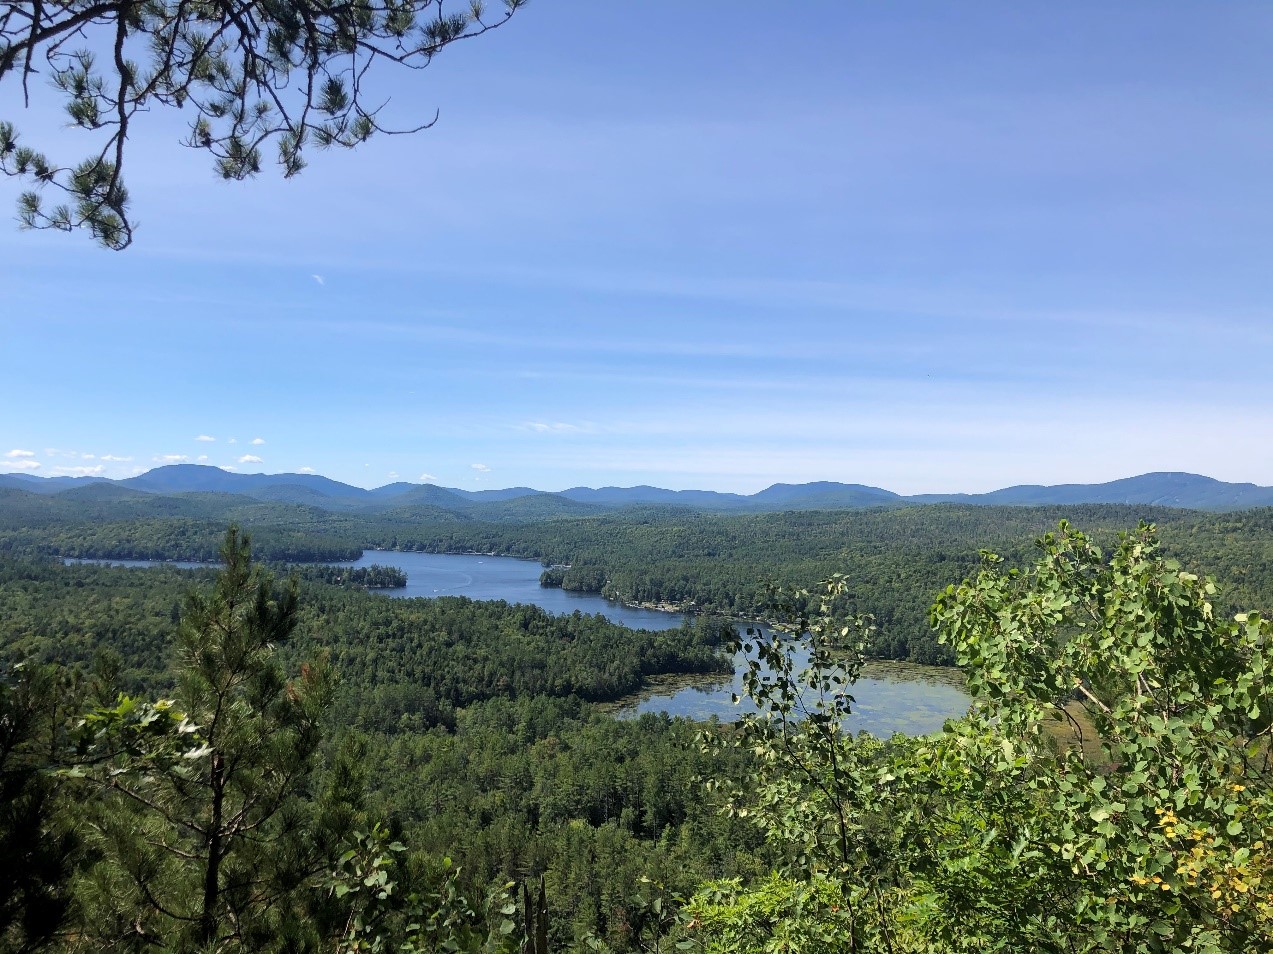 Forest of the Adirondacks